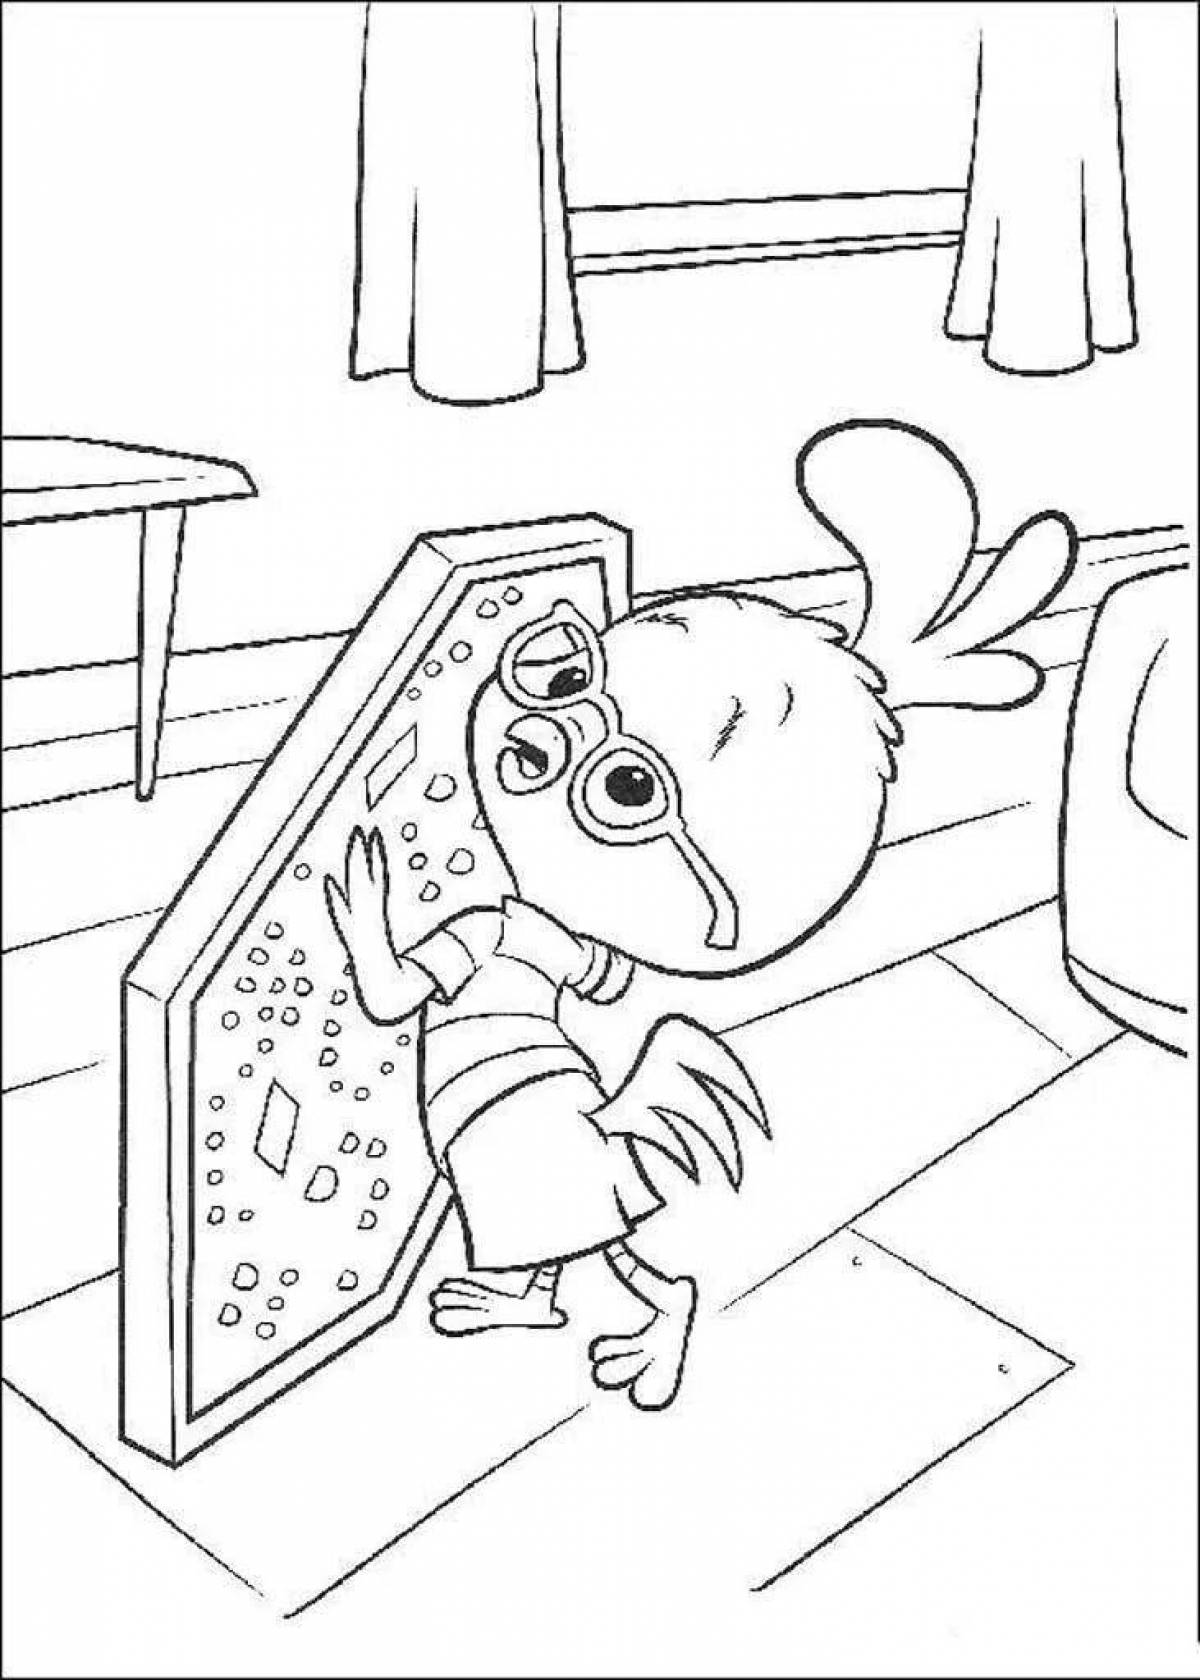 Bubble chicken coloring page